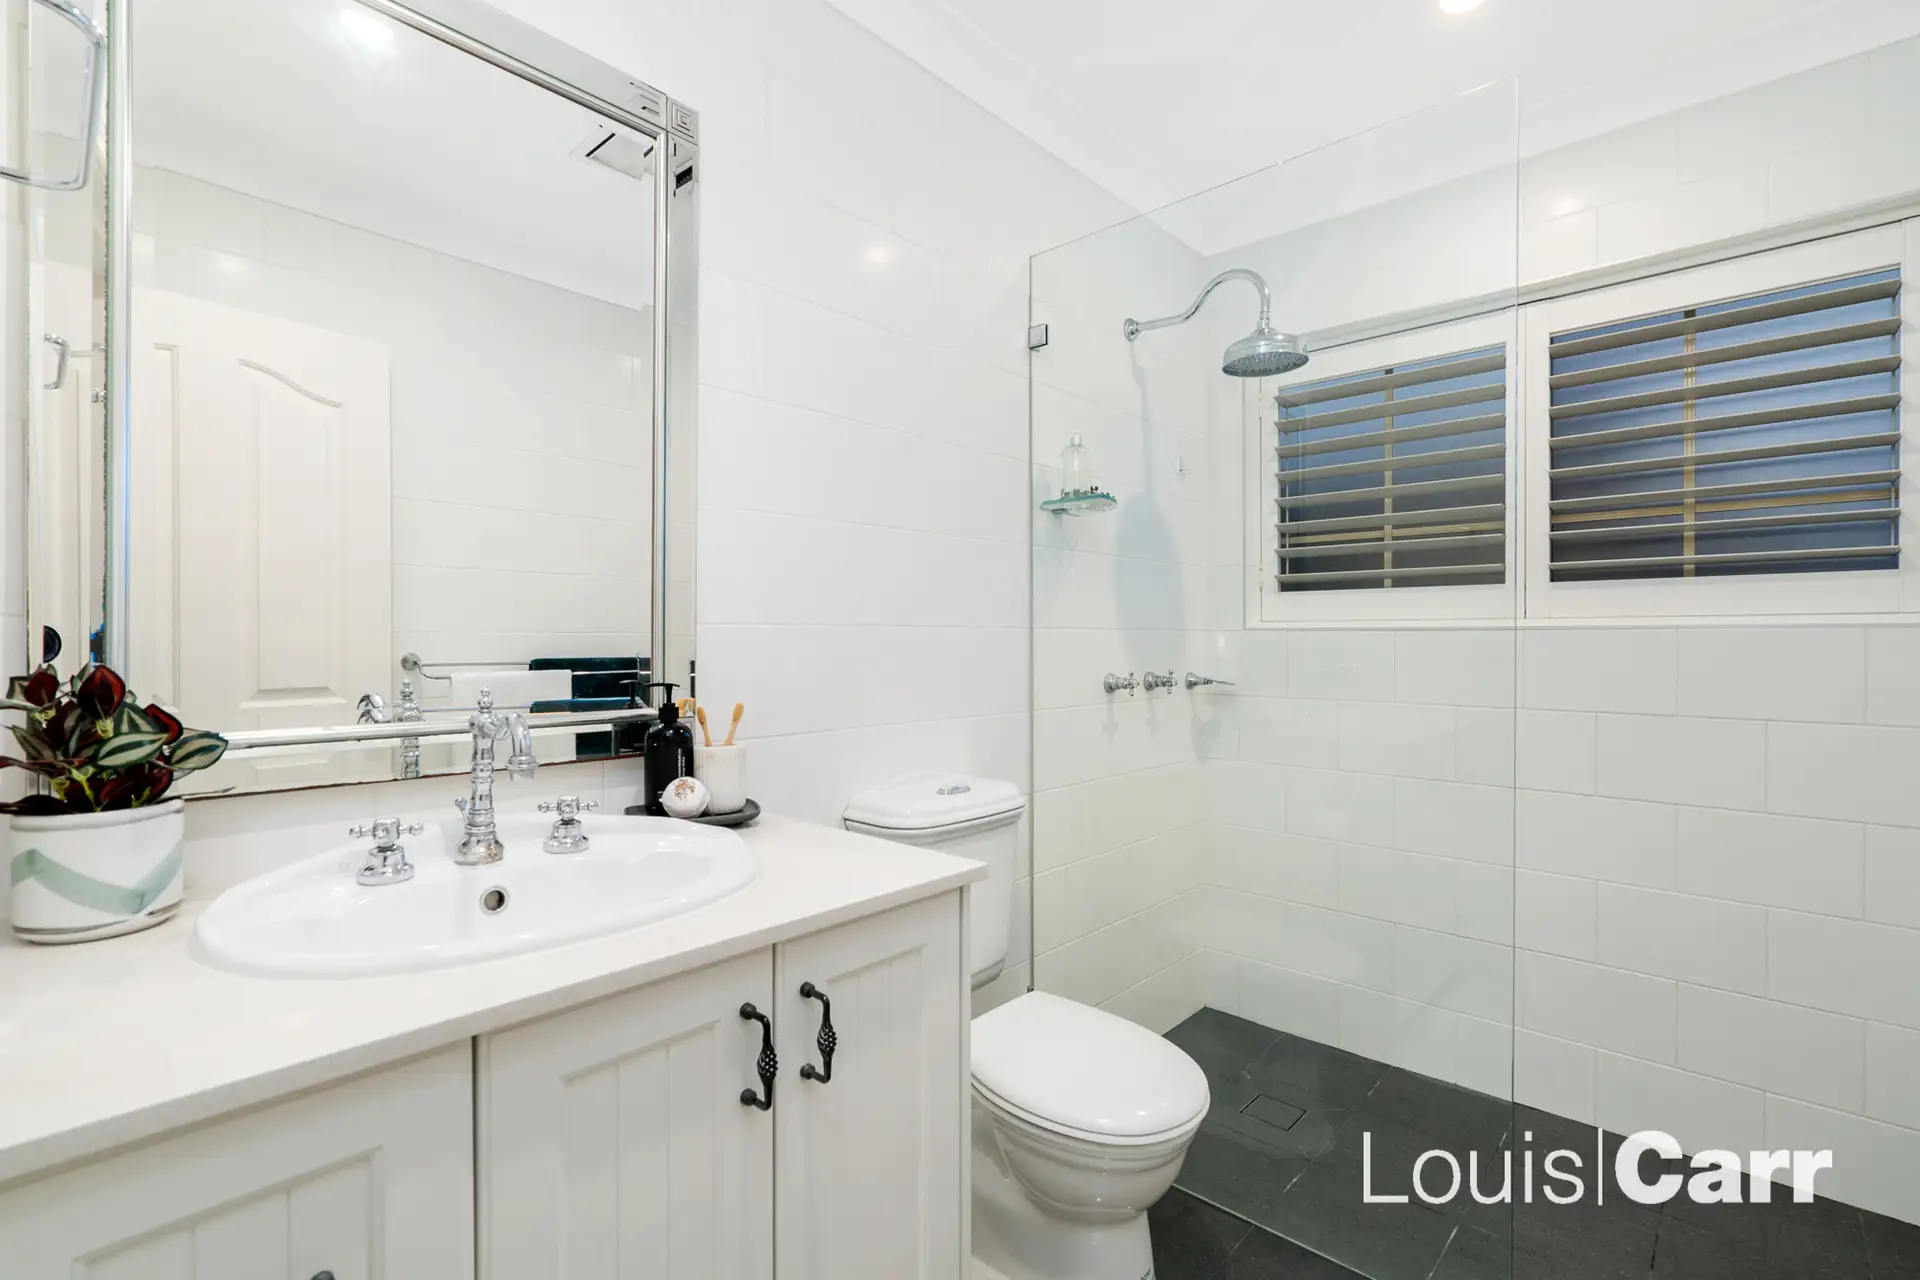 Photo #6: 1/165 Victoria Road, West Pennant Hills - Sold by Louis Carr Real Estate